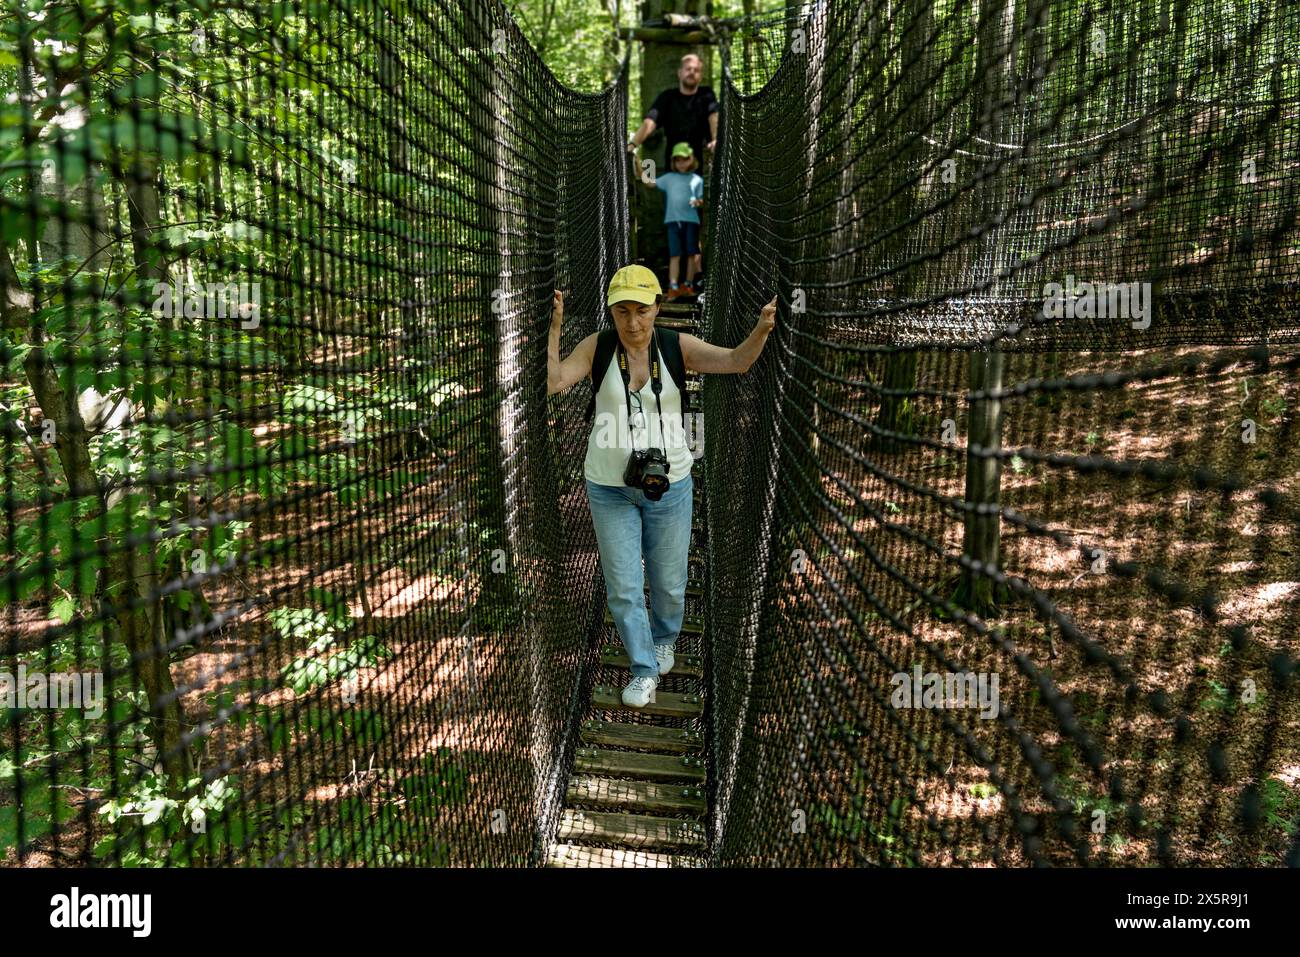 Sporty woman, tourist with camera in treetop path, suspension bridges, ropes, nets, beech forest, family excursion, summit mountain Hoherodskopf Stock Photo